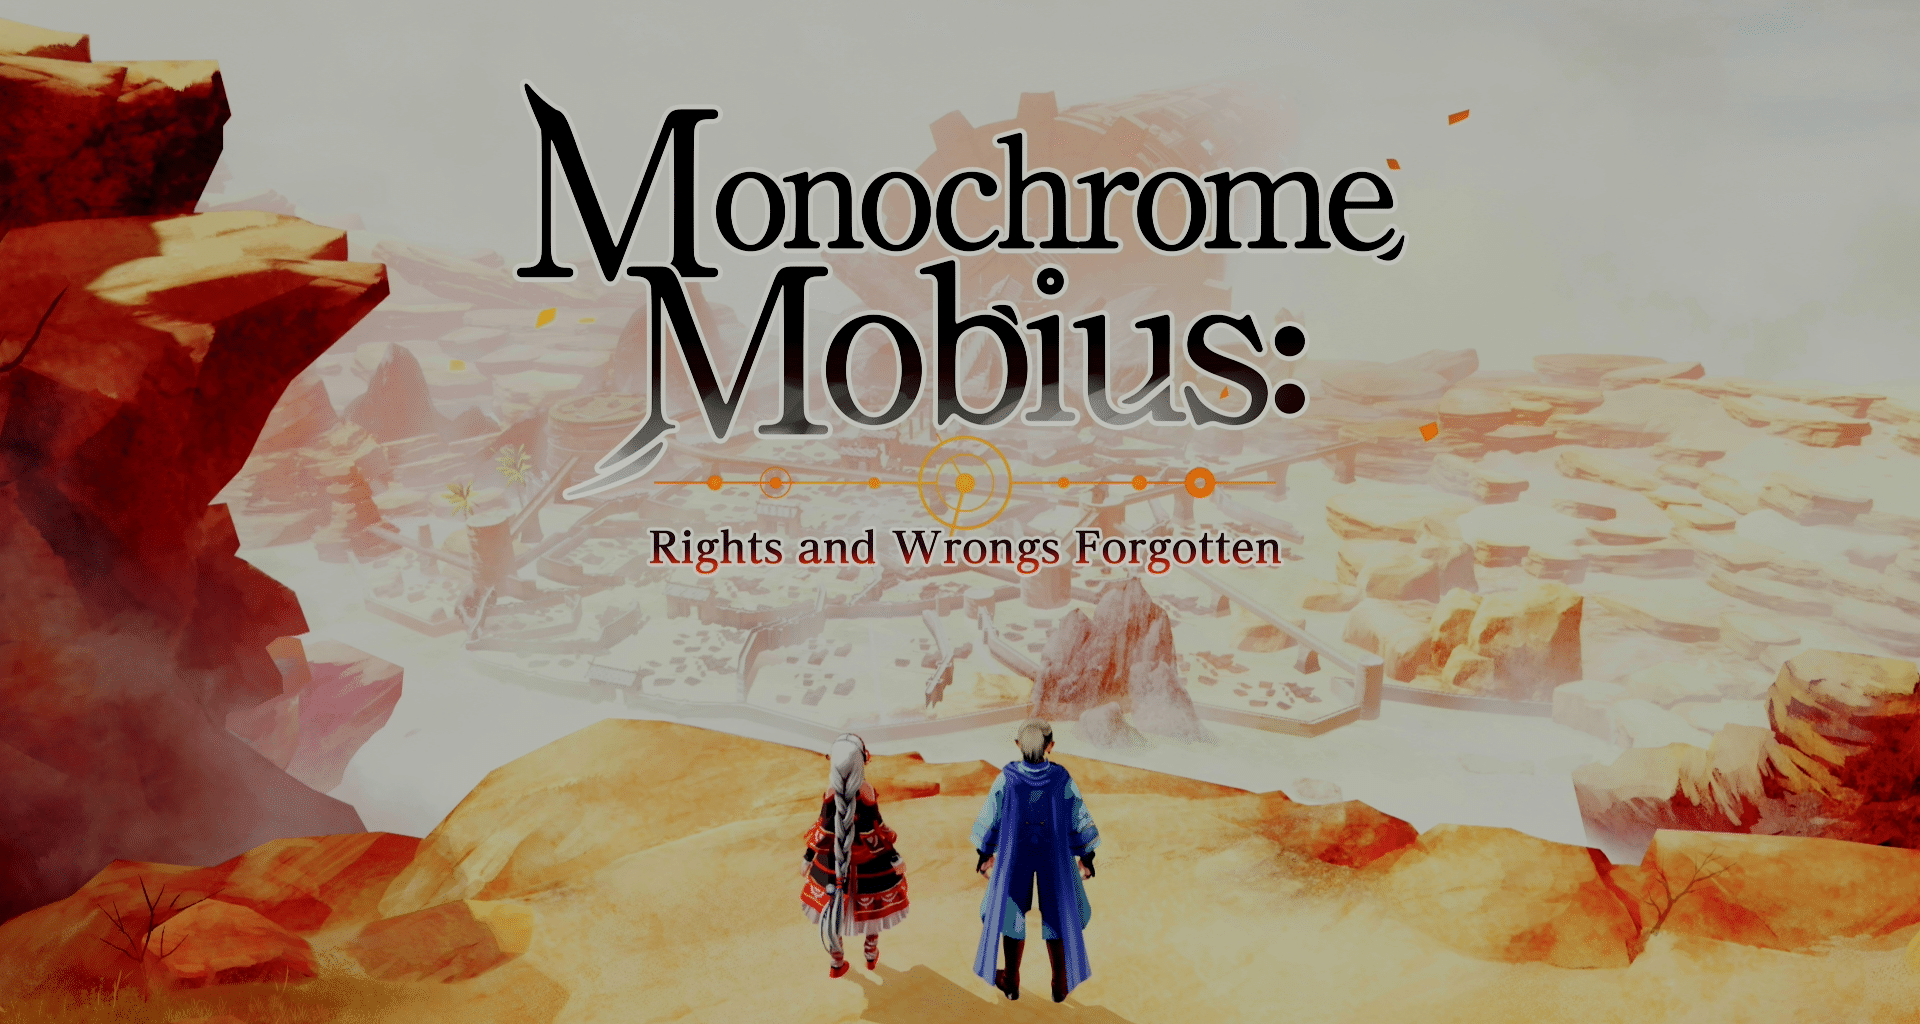 Monochrome Mobius: Rights and Wrongs Forgotten Review - The Title Says a Lot About the Experience 324543 43534